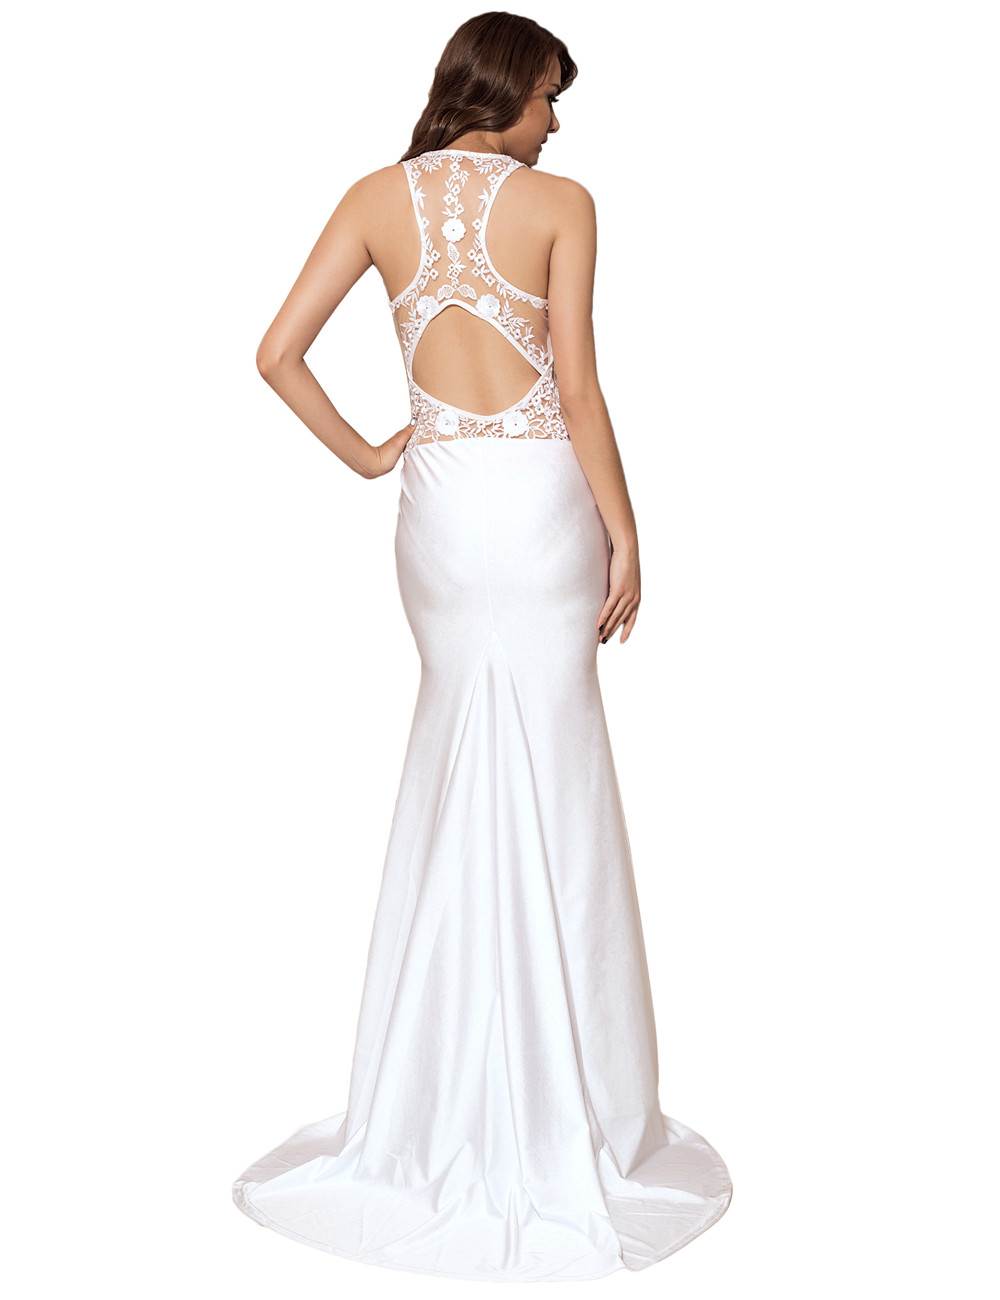 Wholesale Embroidery Sleeveless High Neck Backless White Party Gown